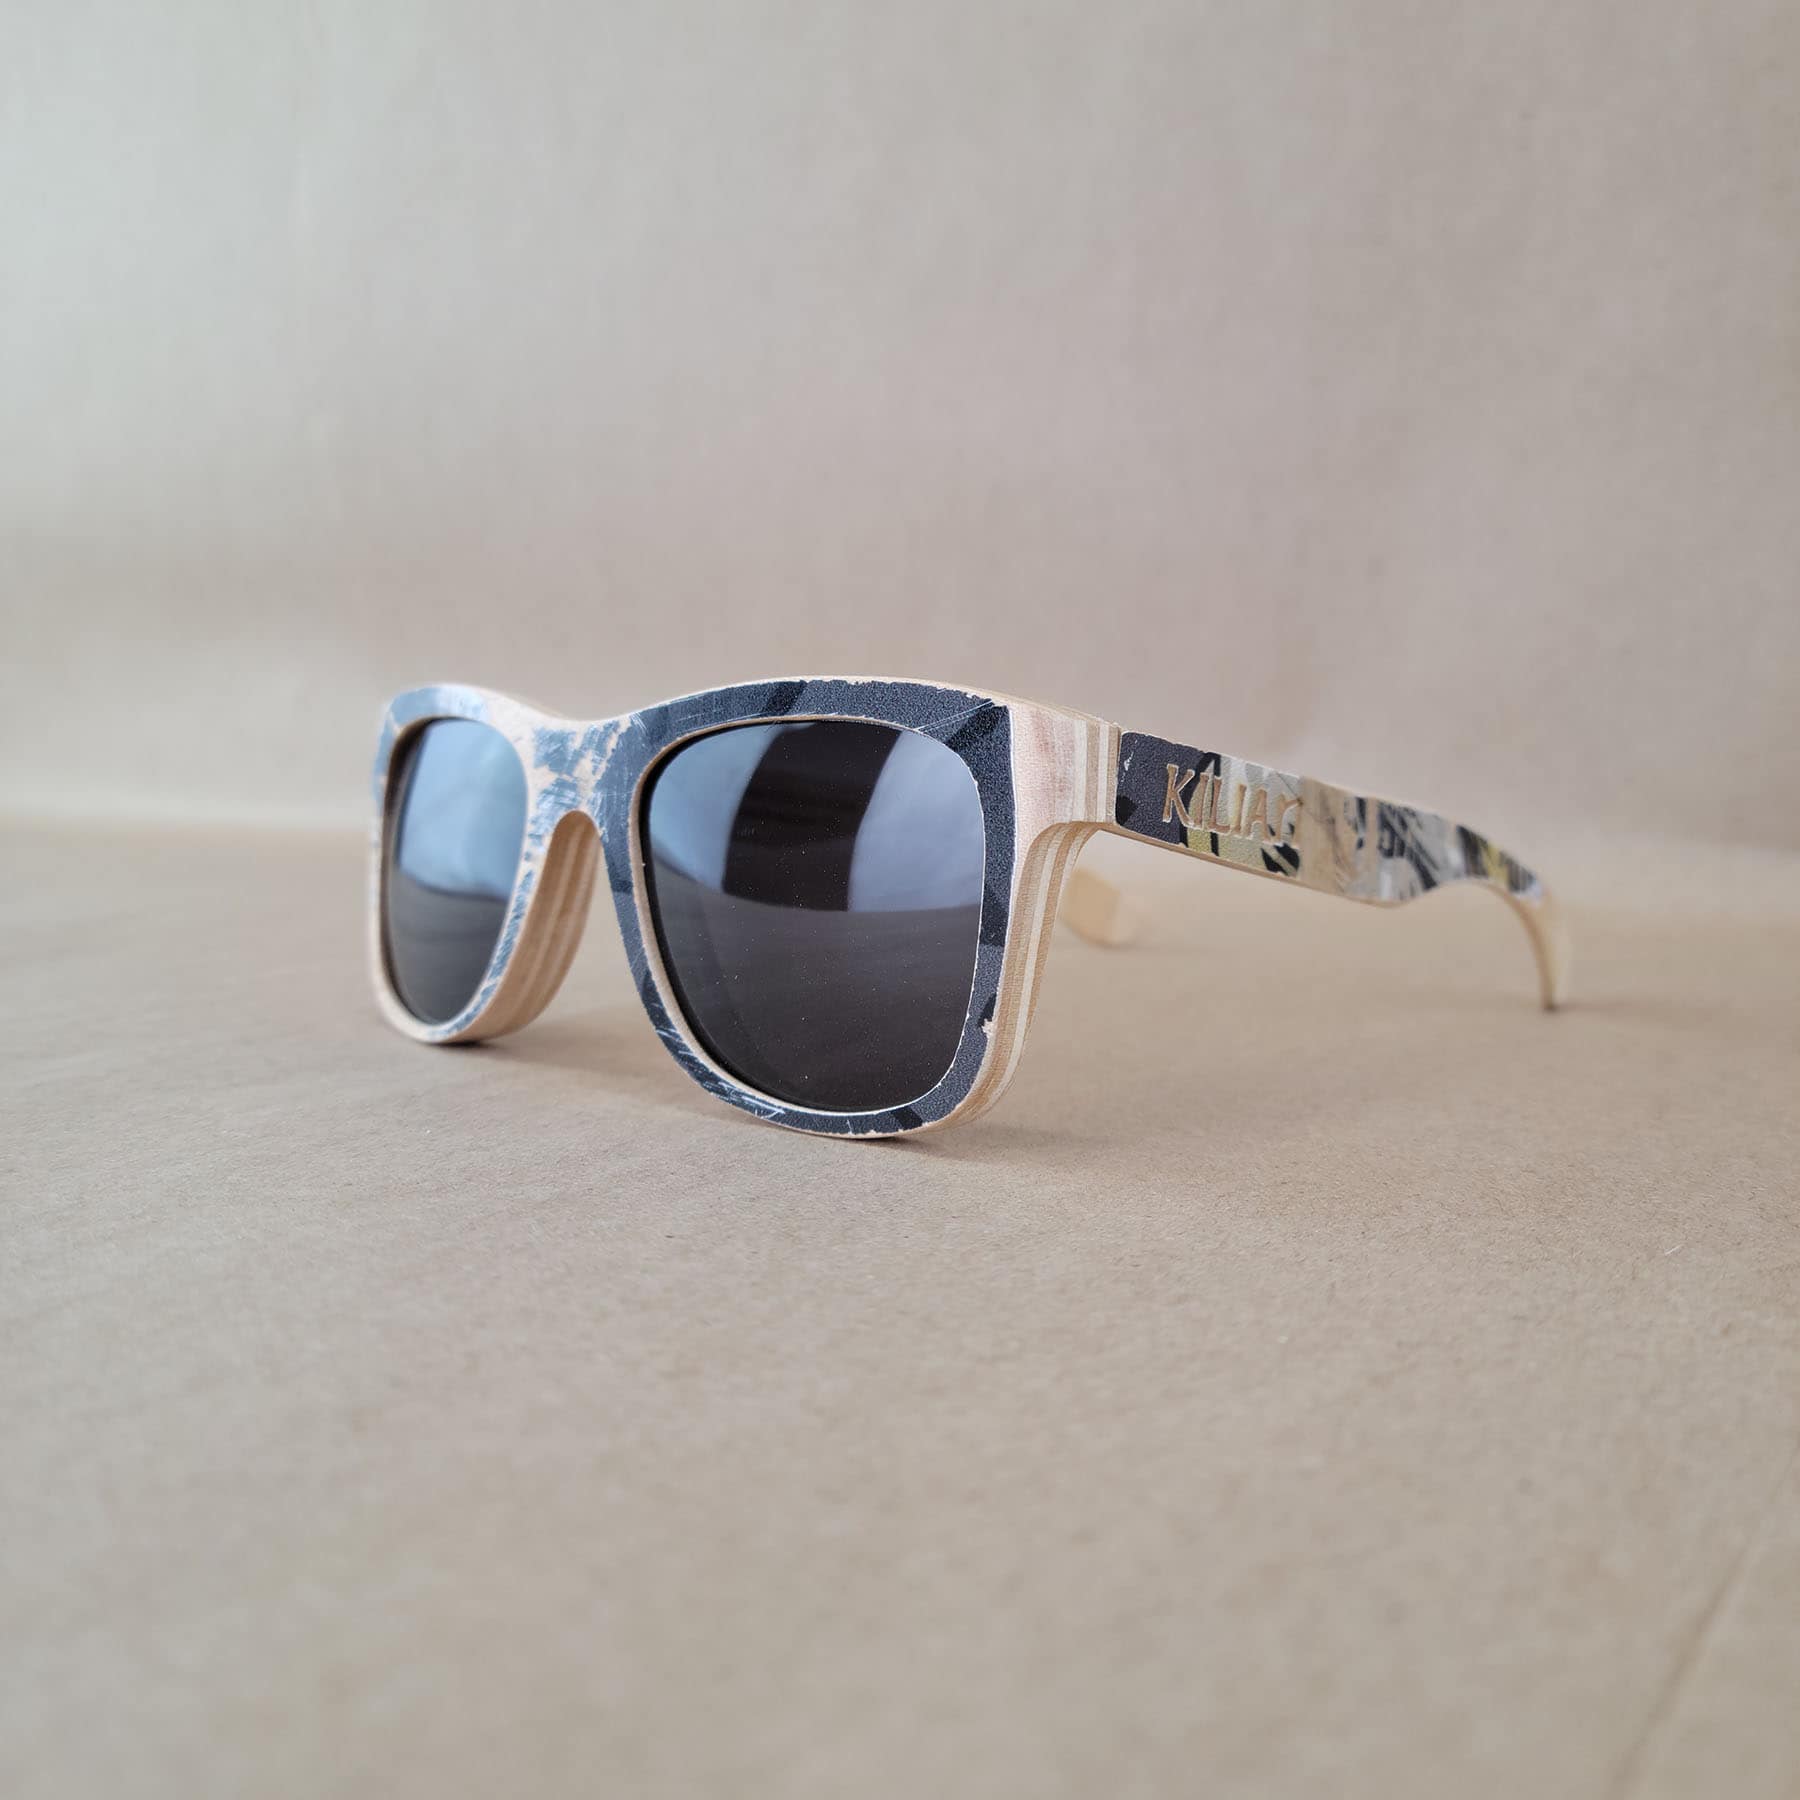 Kilian Martin Collection #3 – 3 of 6 Recycled Skateboard Sunglasses